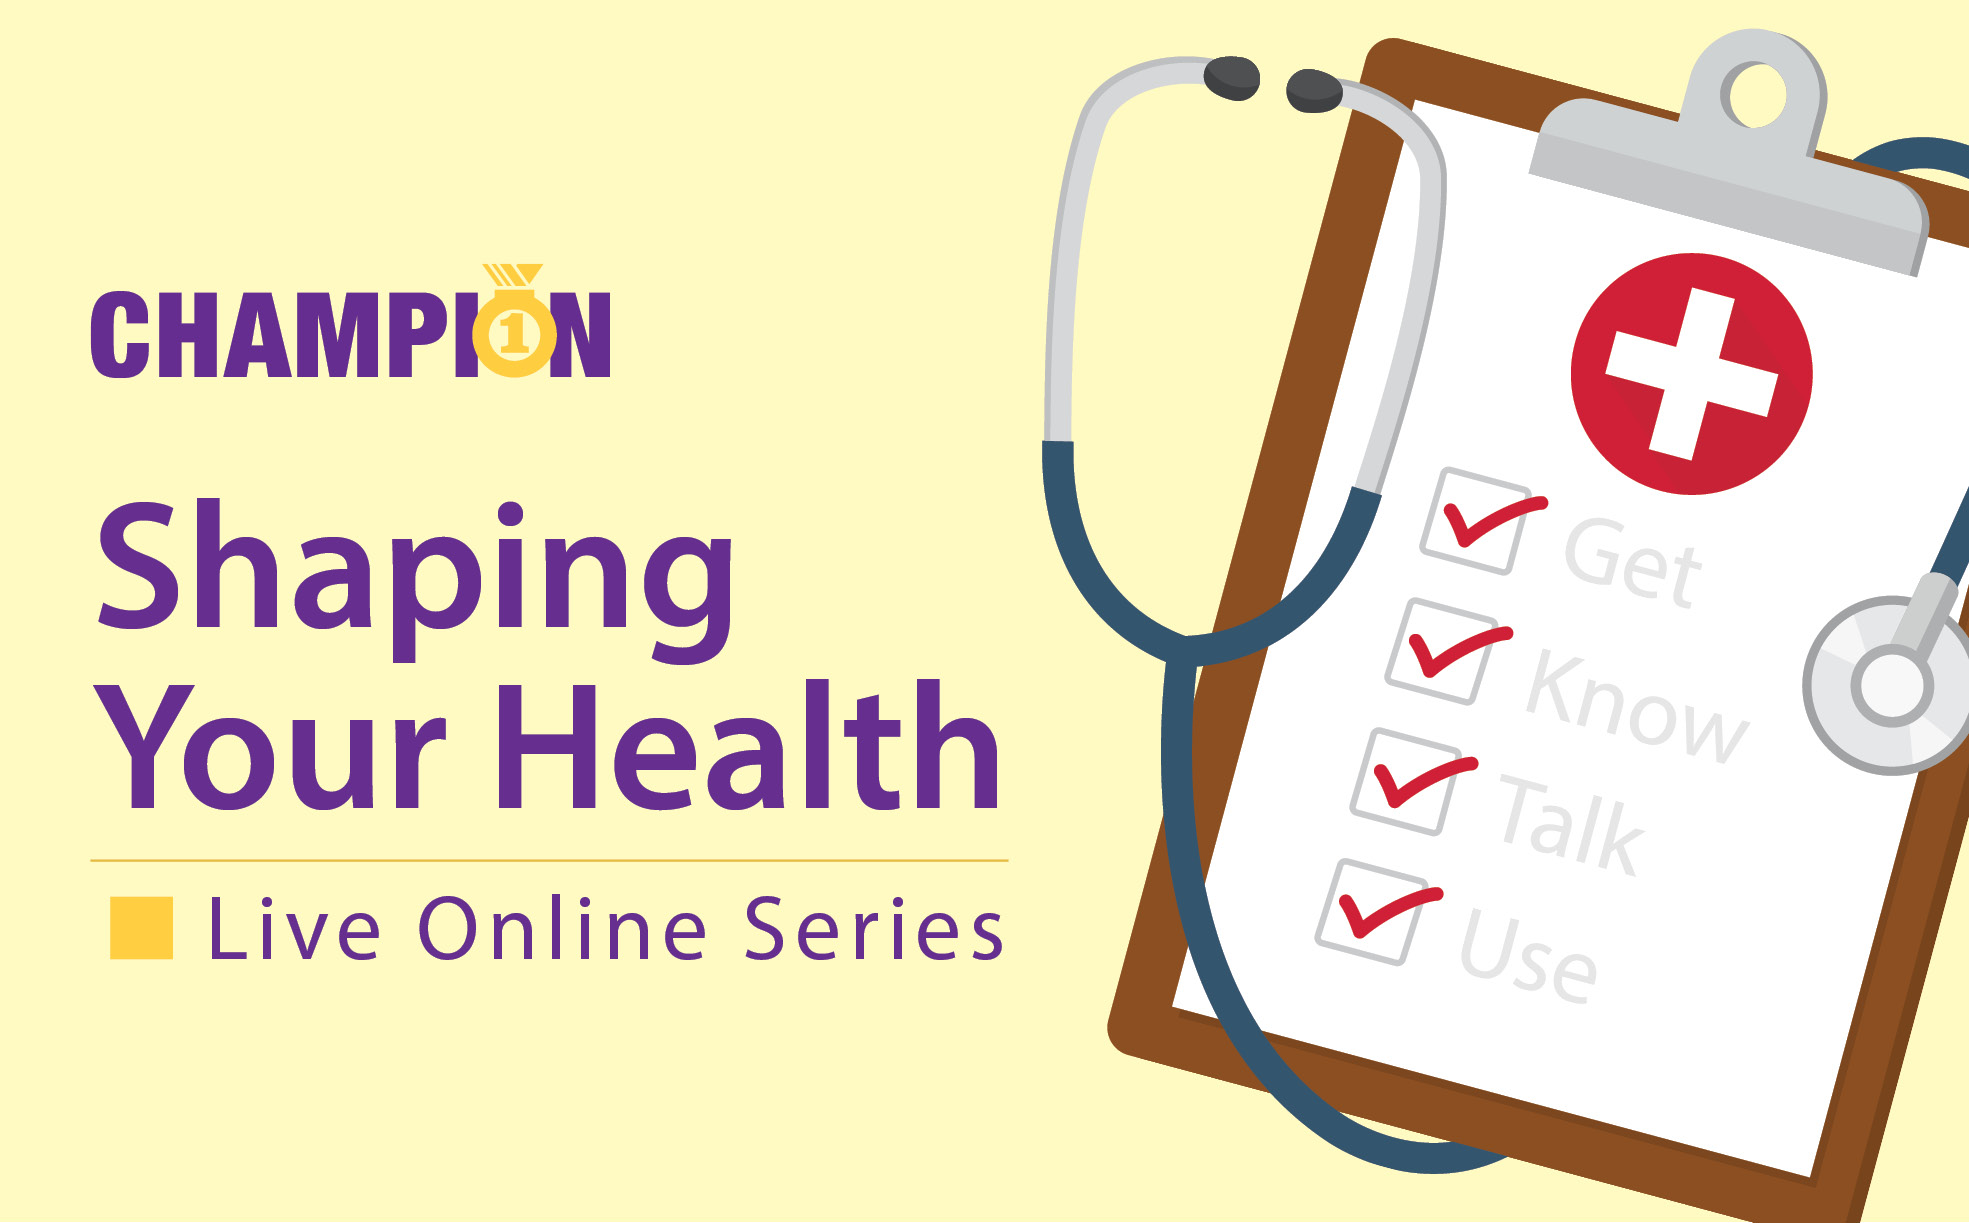 Illustration of a medical clipboard with items checked off: get, know talk use. Champion Shaping Your Health, live online series